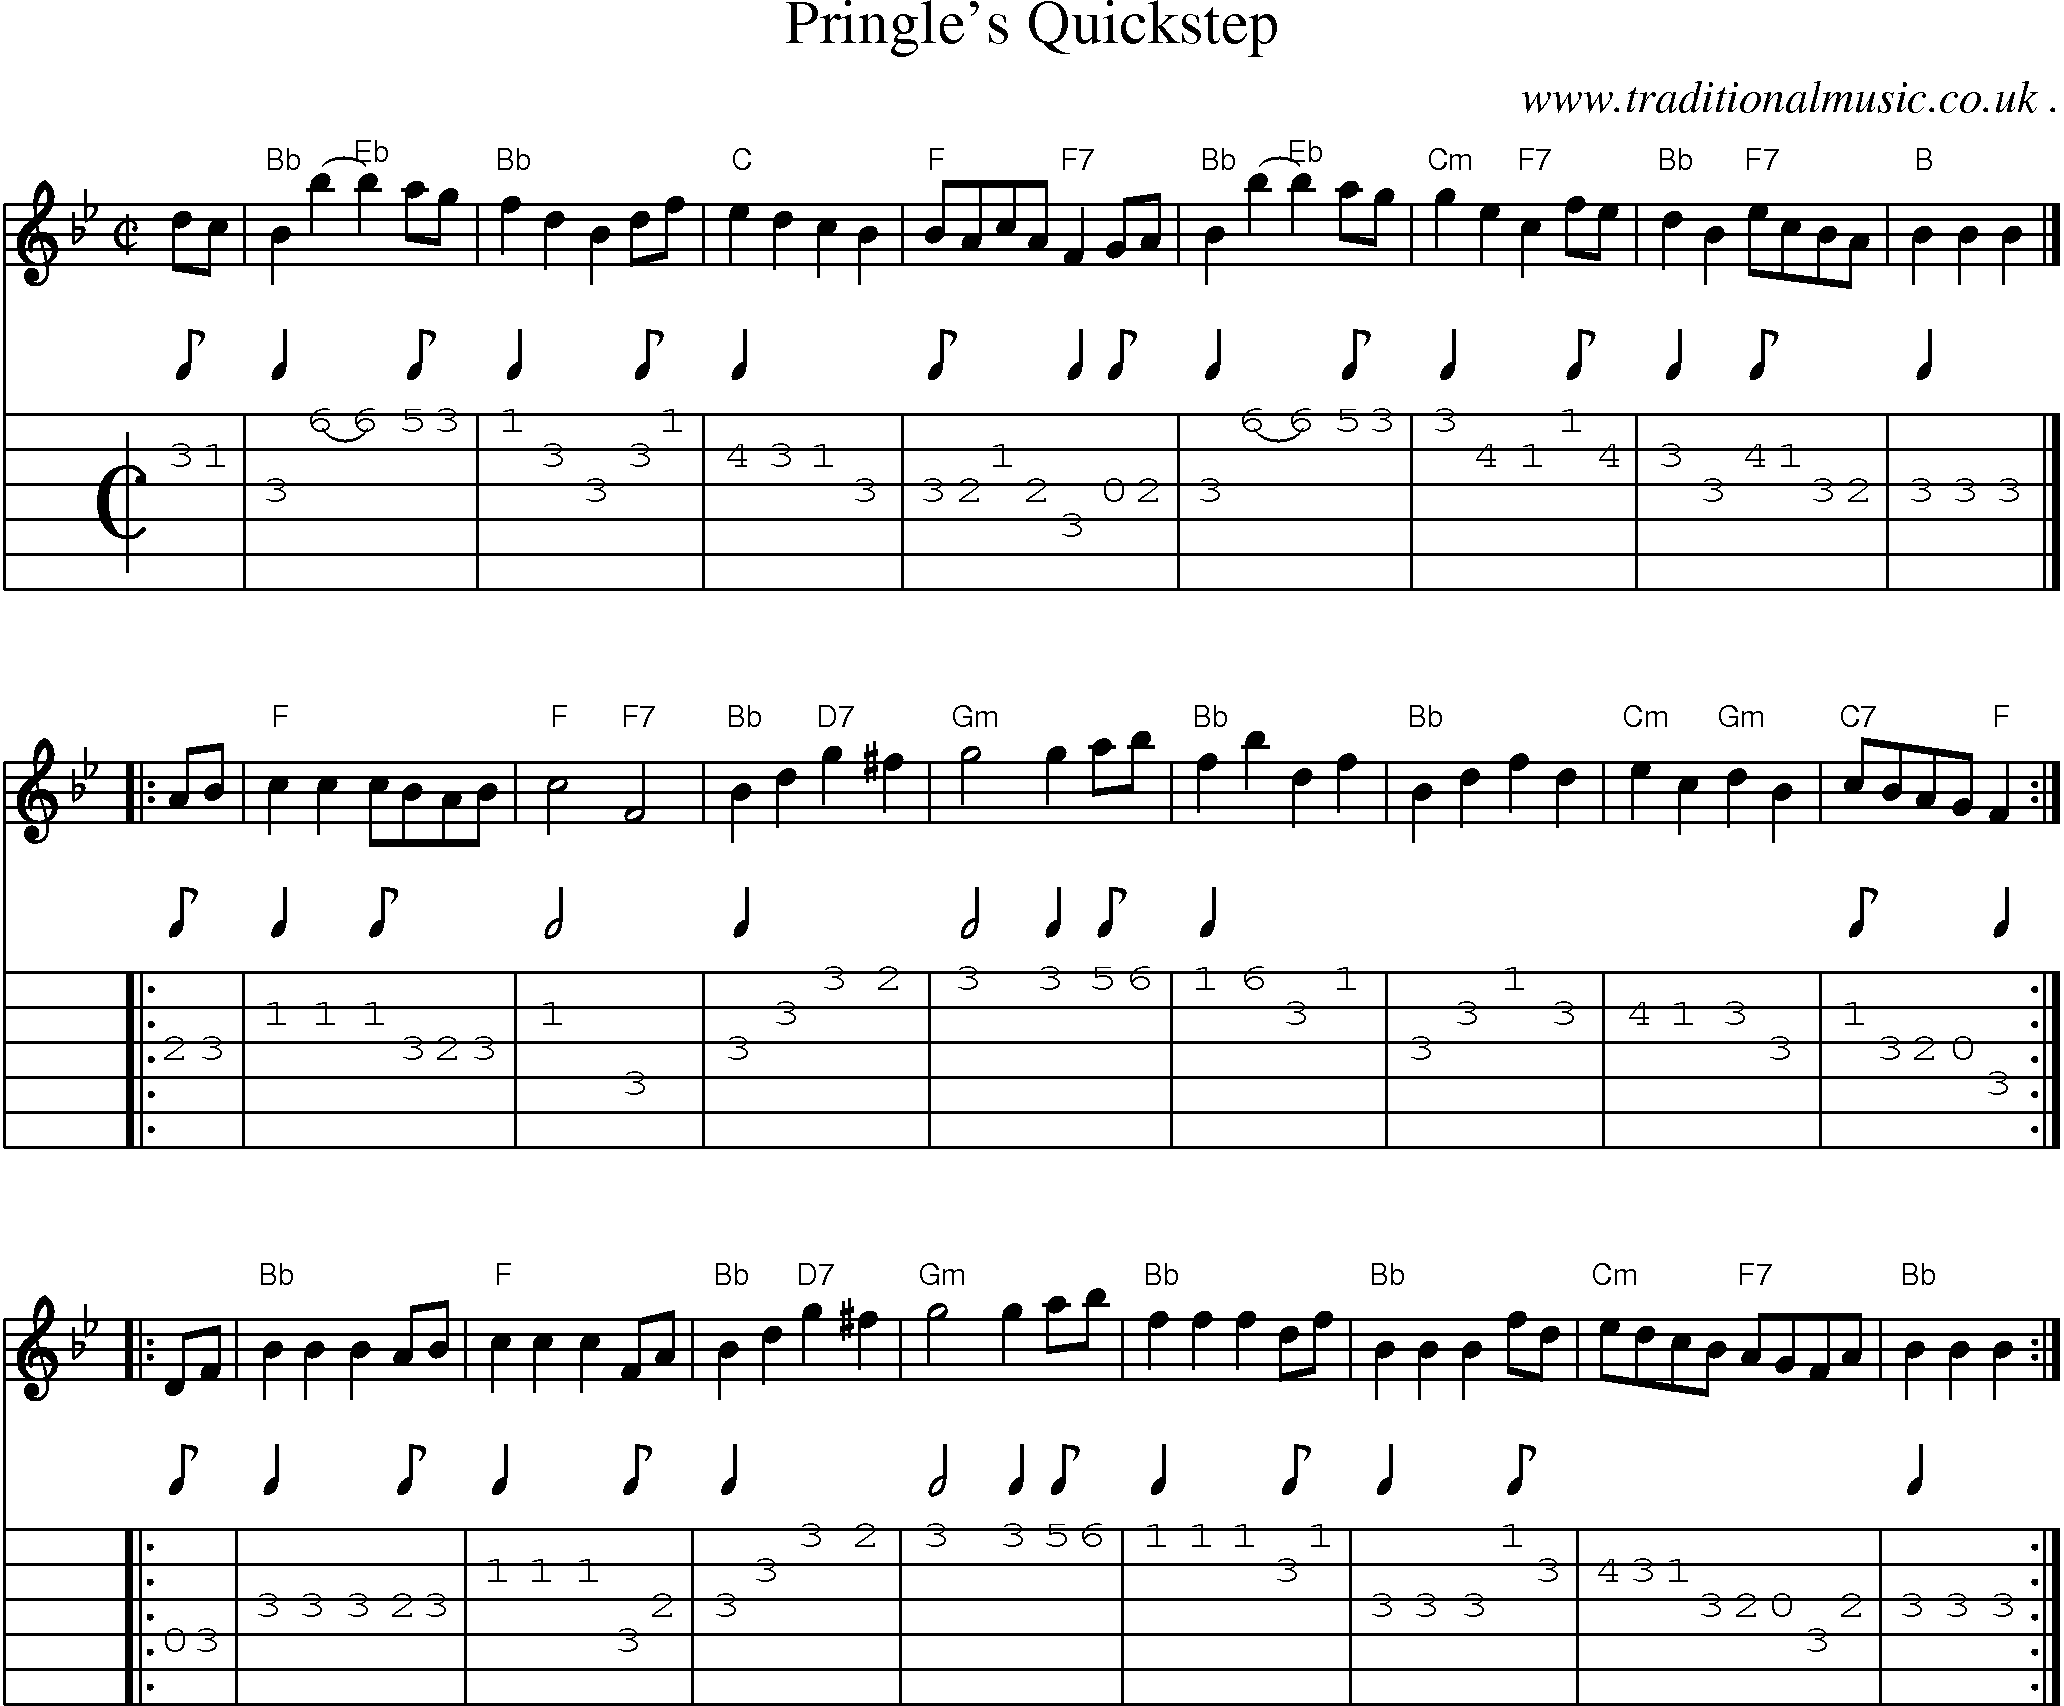 Sheet-music  score, Chords and Guitar Tabs for Pringles Quickstep